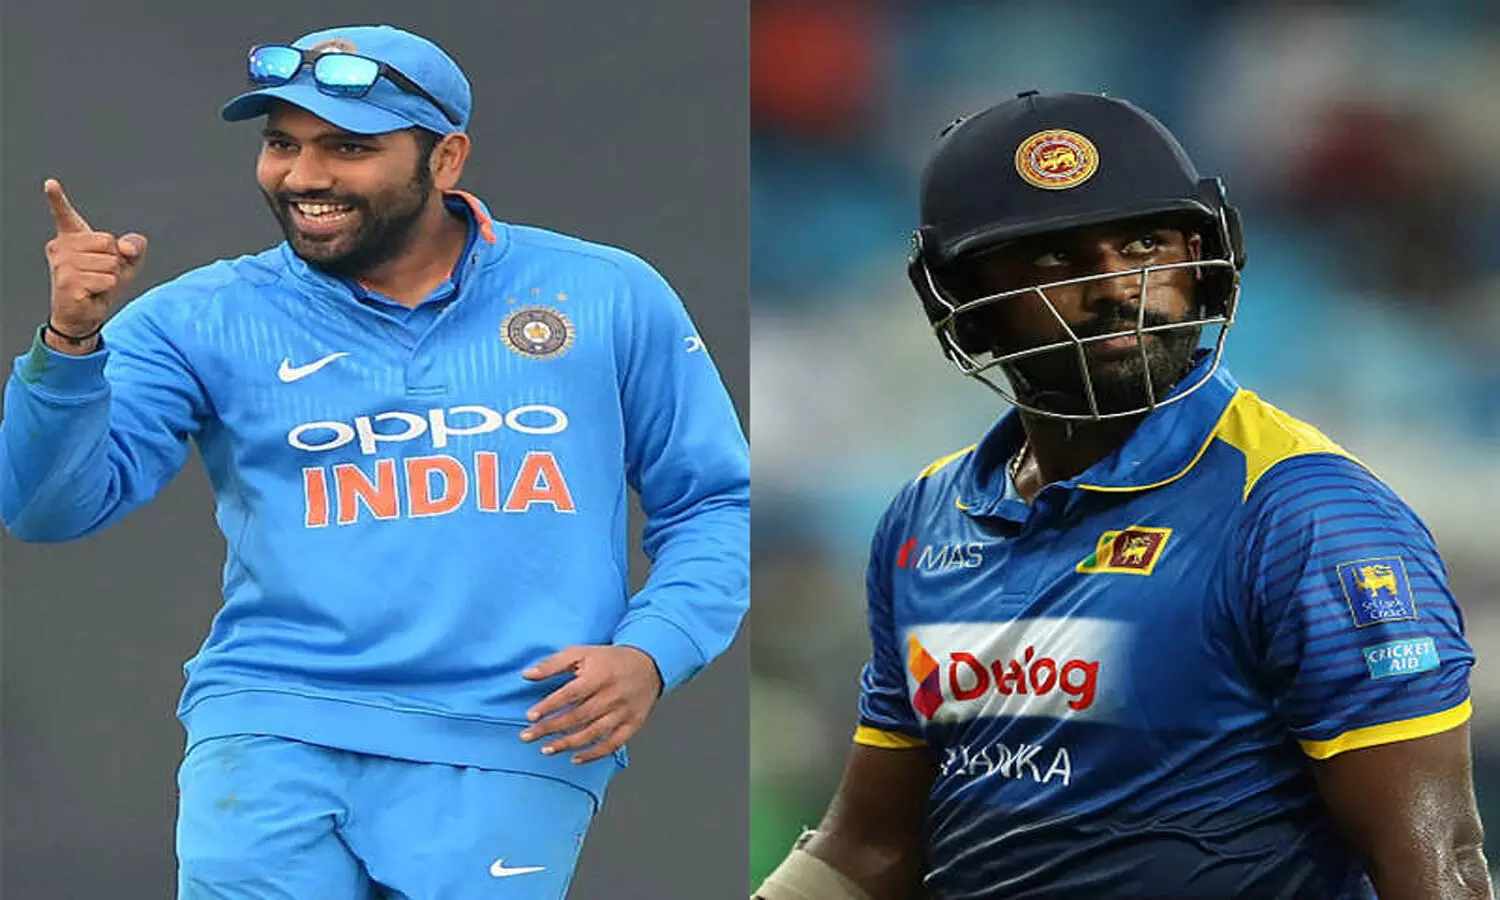 India vs Sri Lanka 1st Test: When and Where to Watch IND vs SL Live in India